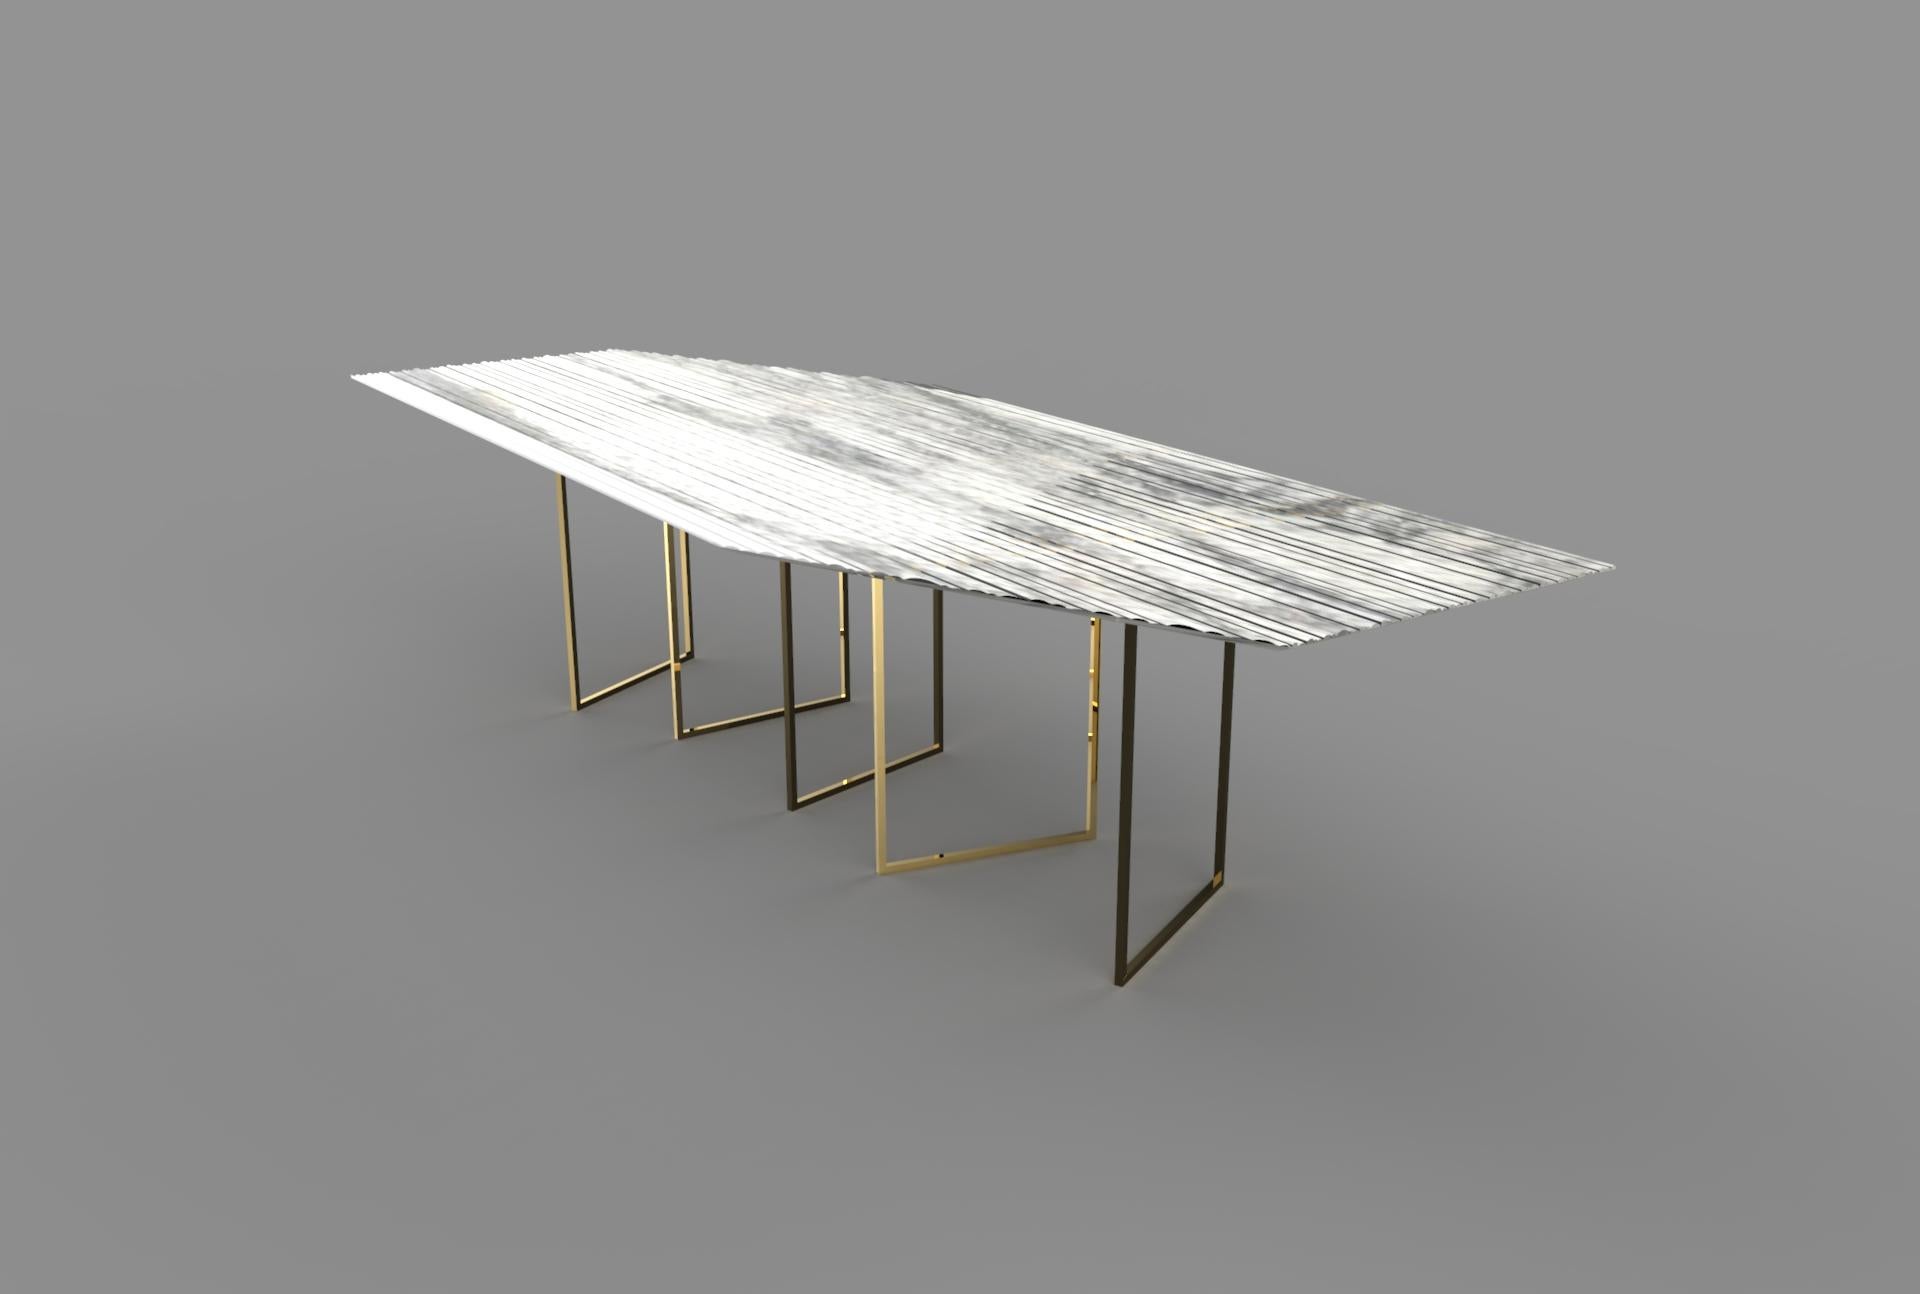 The ‘Moov’ Bespoke table is designed by Stefano Trapani. The hexagonal table top is entirely made in hand cut Carrara marble; the feet are made in gilt bronze and simulate a movement of the marble. The table is fully customizable, by choosing the